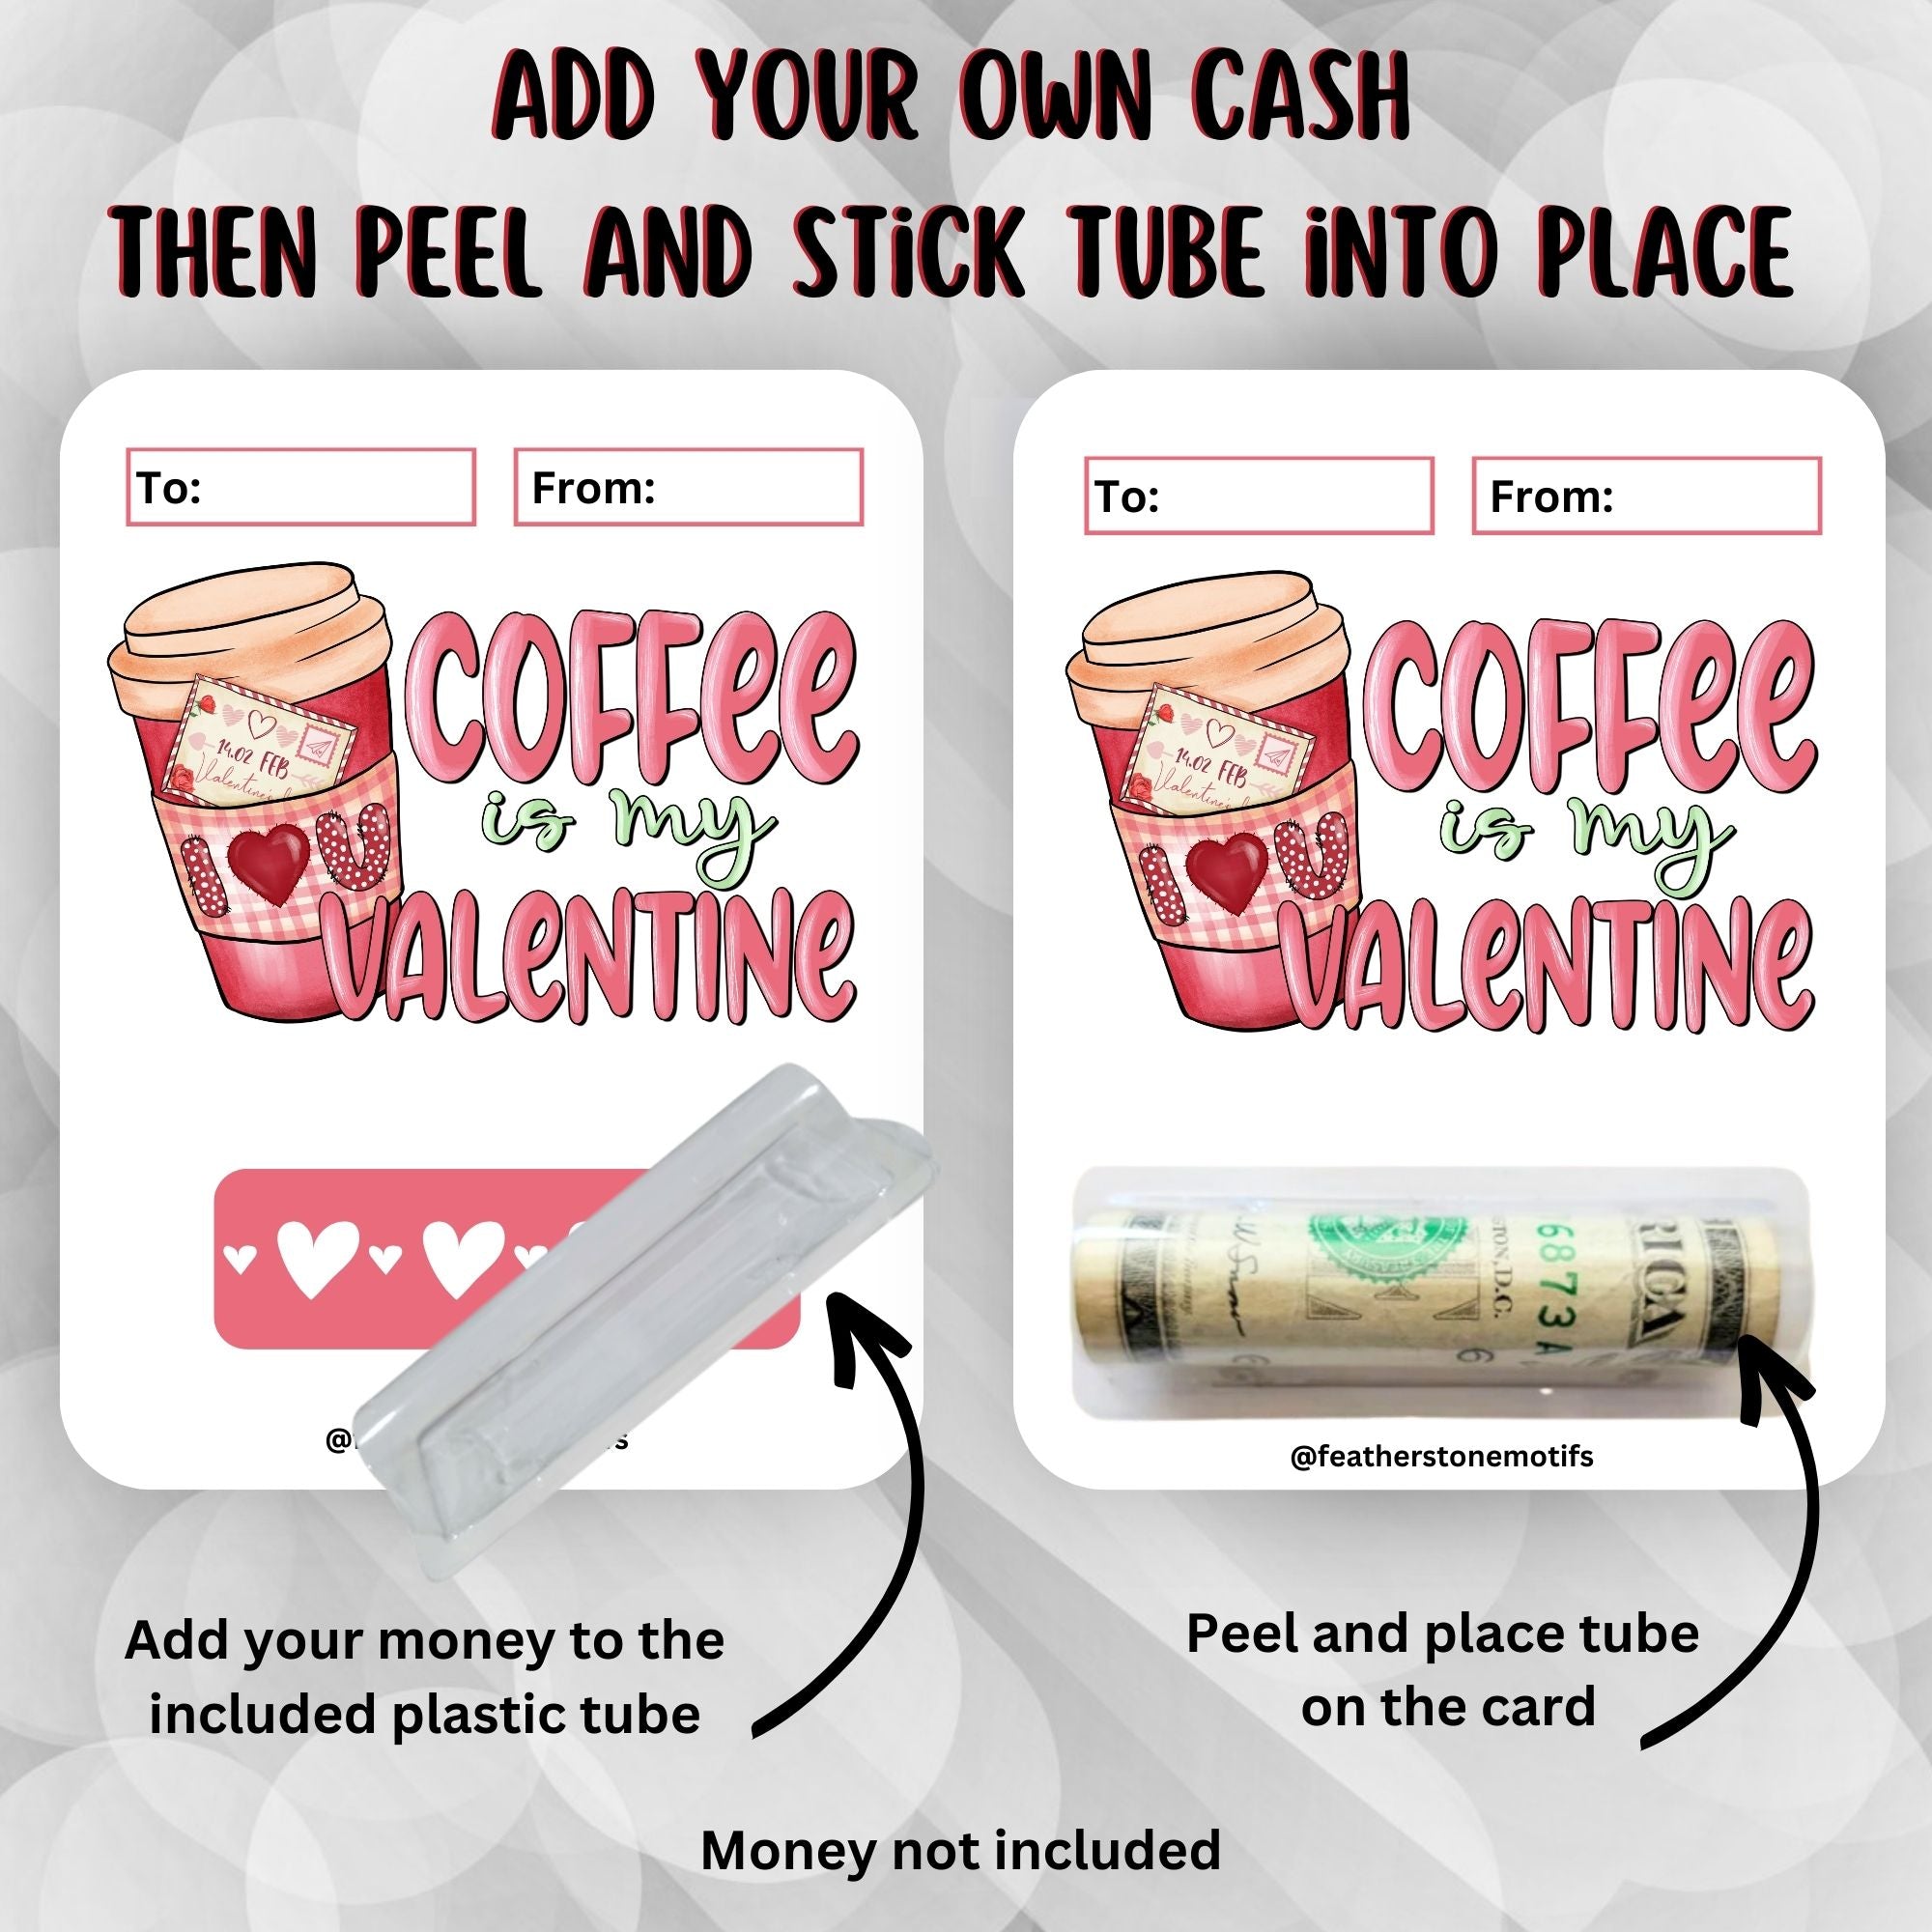 This image shows how to attach the money tube to the Coffee Valentine Money Card.